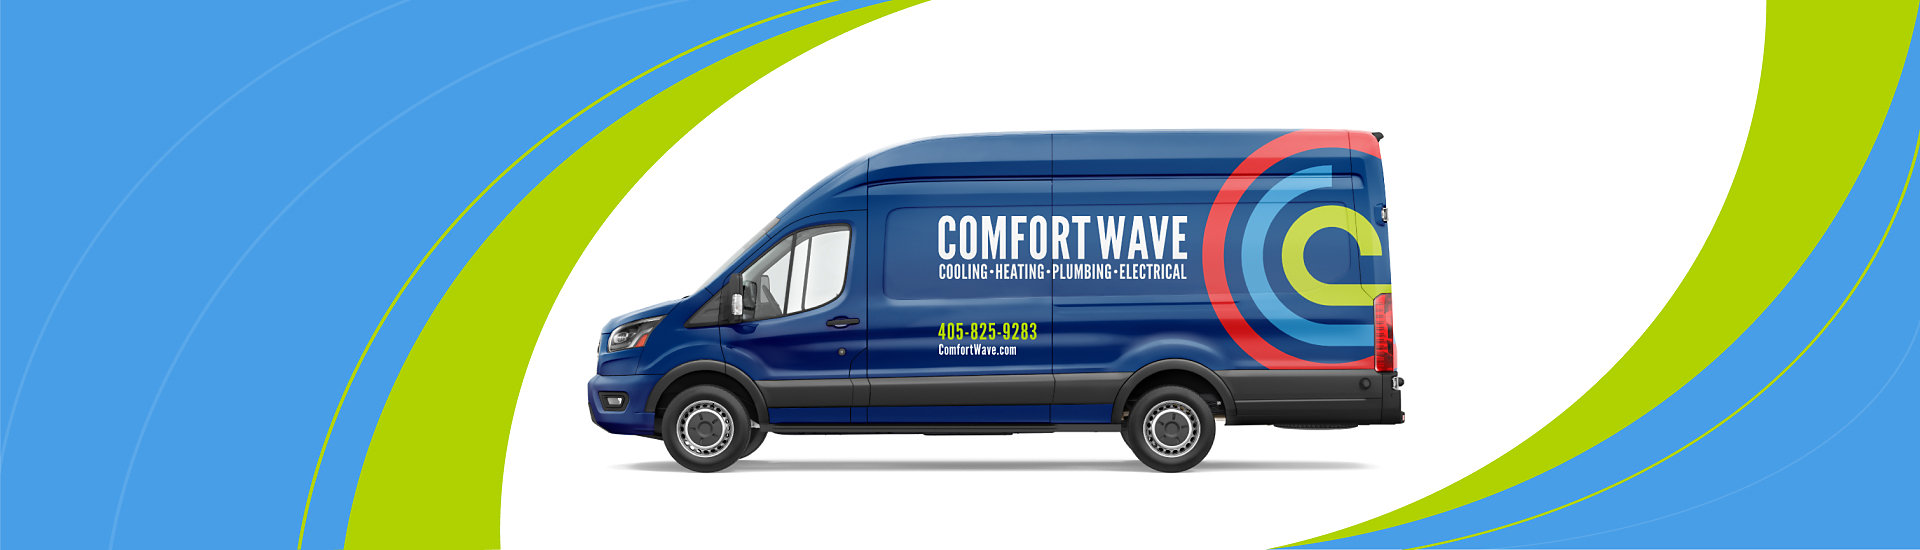 A blue van with comfort wave contact information